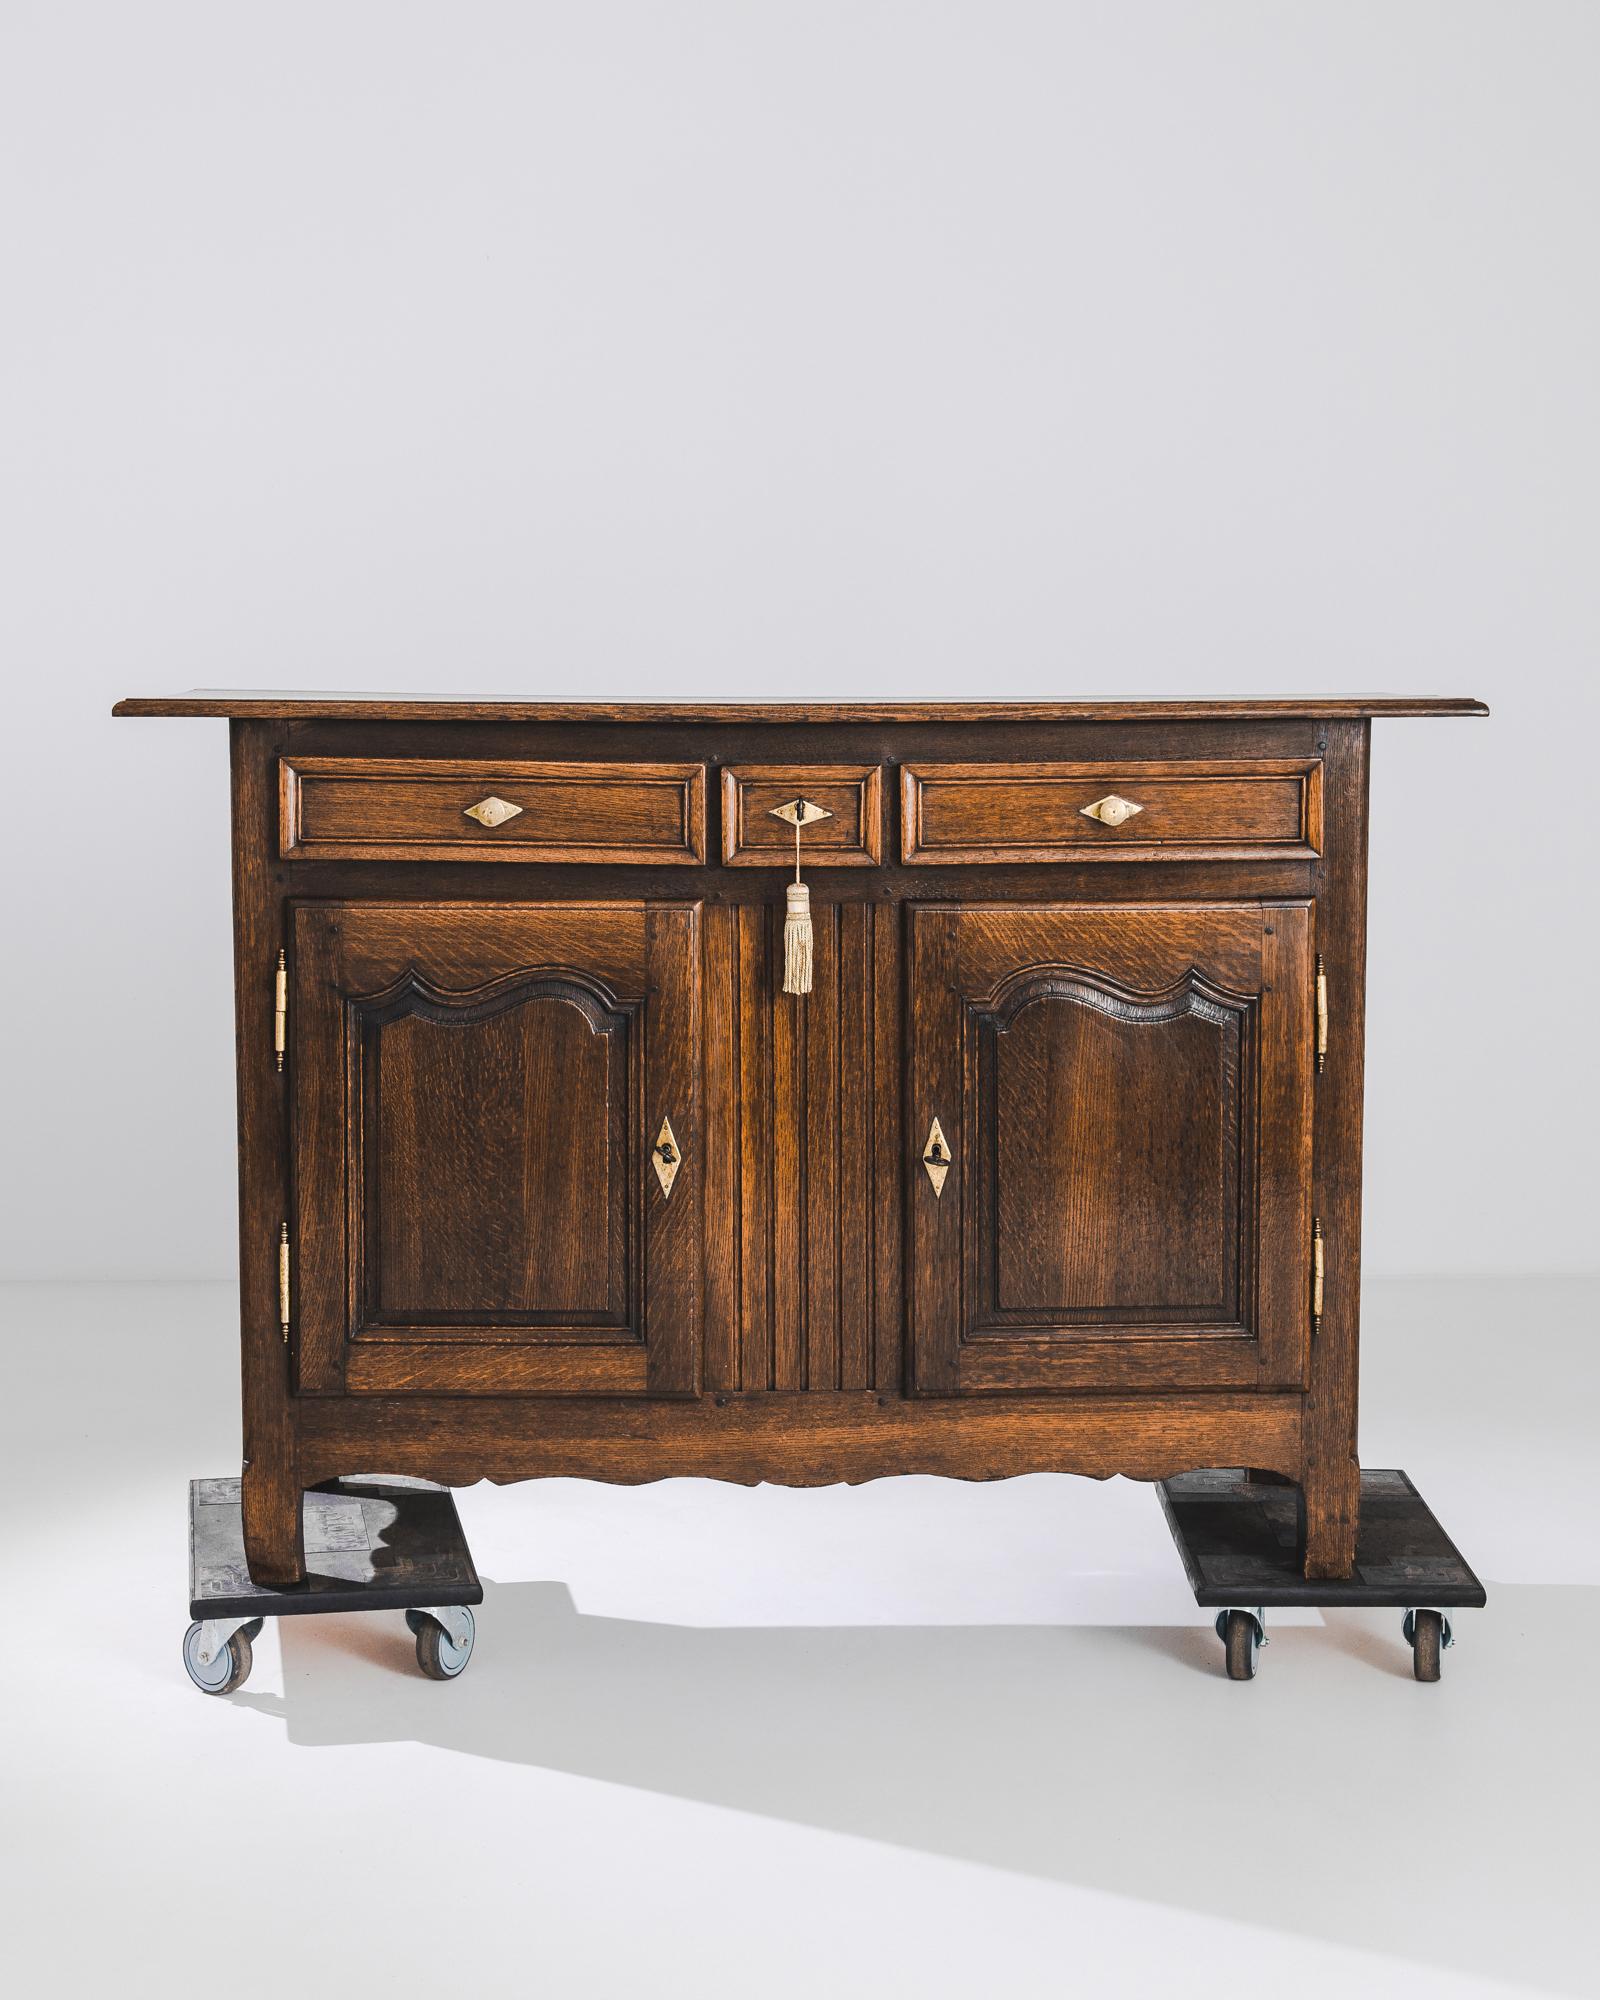 A wooden buffet from 1820s France. The tawny color and deep shine of the original patina make a warm, dignified impression; the lively curves of the door panelling and scalloped apron lend a sense of fluidity to the upright case. Gilded,